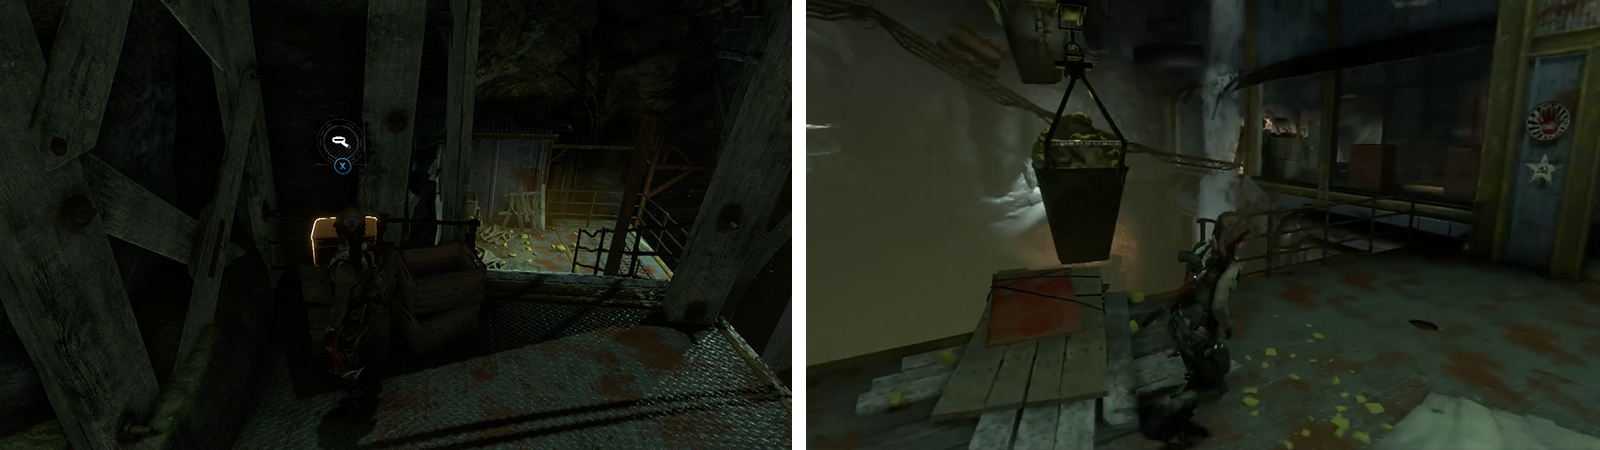 Grab Relic 15 from the container near the top of the stairs (left) and hop across to the container full of stones (right).